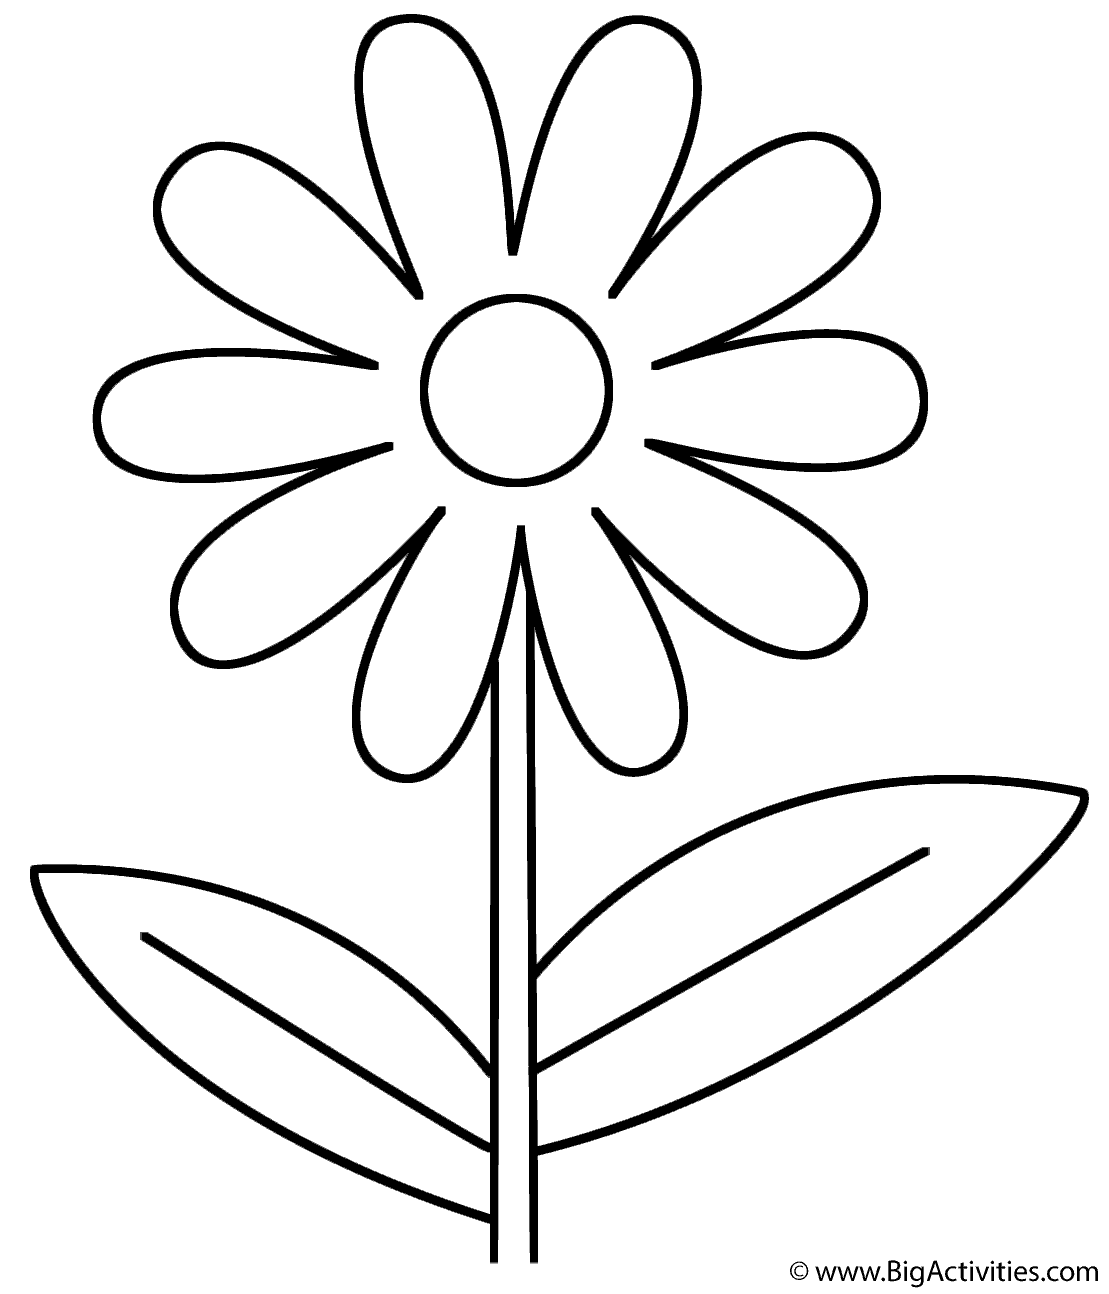 Flower - Coloring Page (Mother's Day)